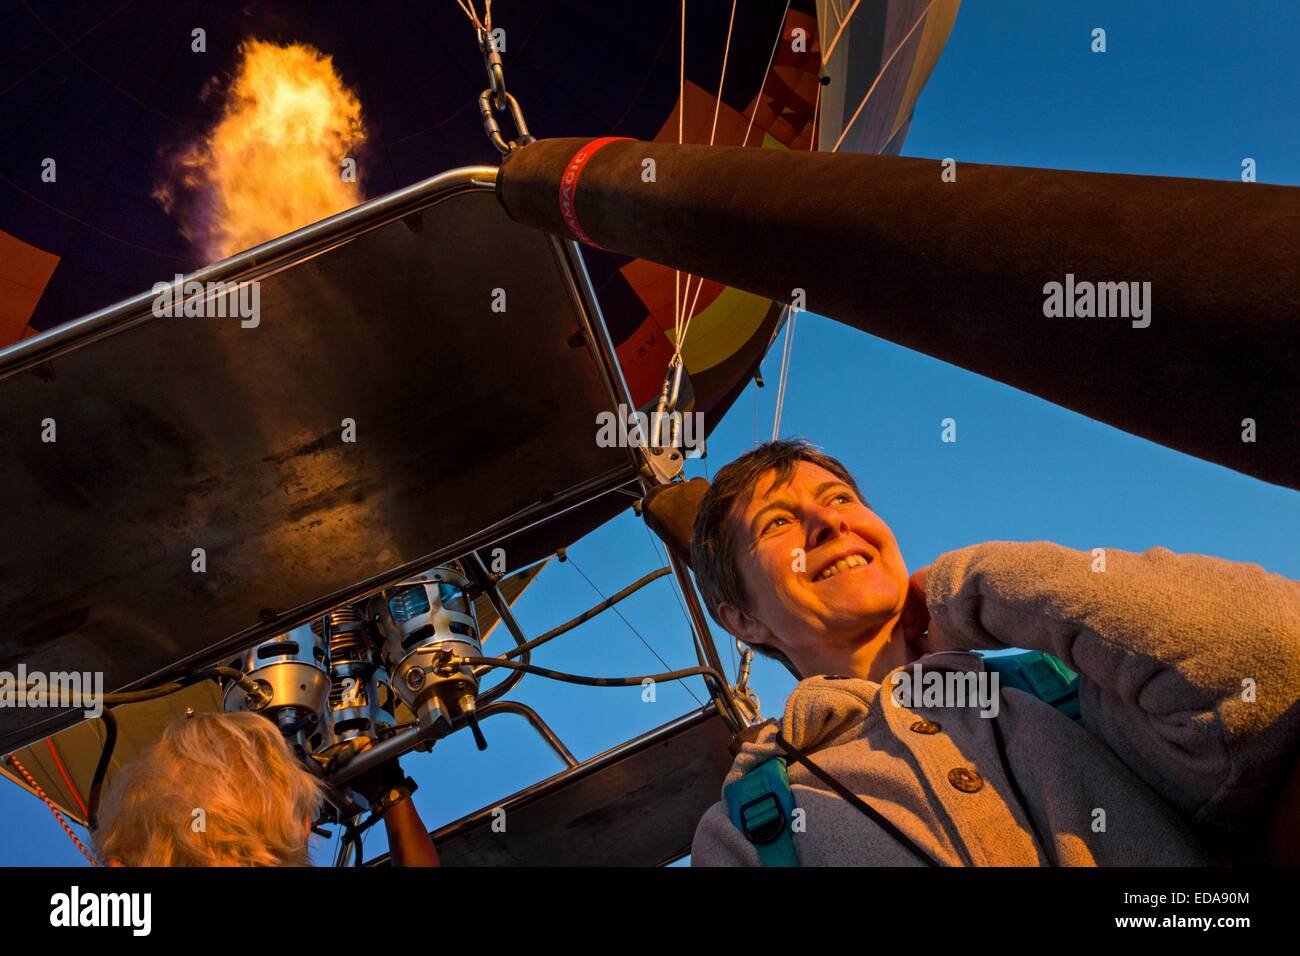 Woman smiling in early morning sunlight while enjoying a balloon flight over the desert in Namibia, Africa. Stock Photo